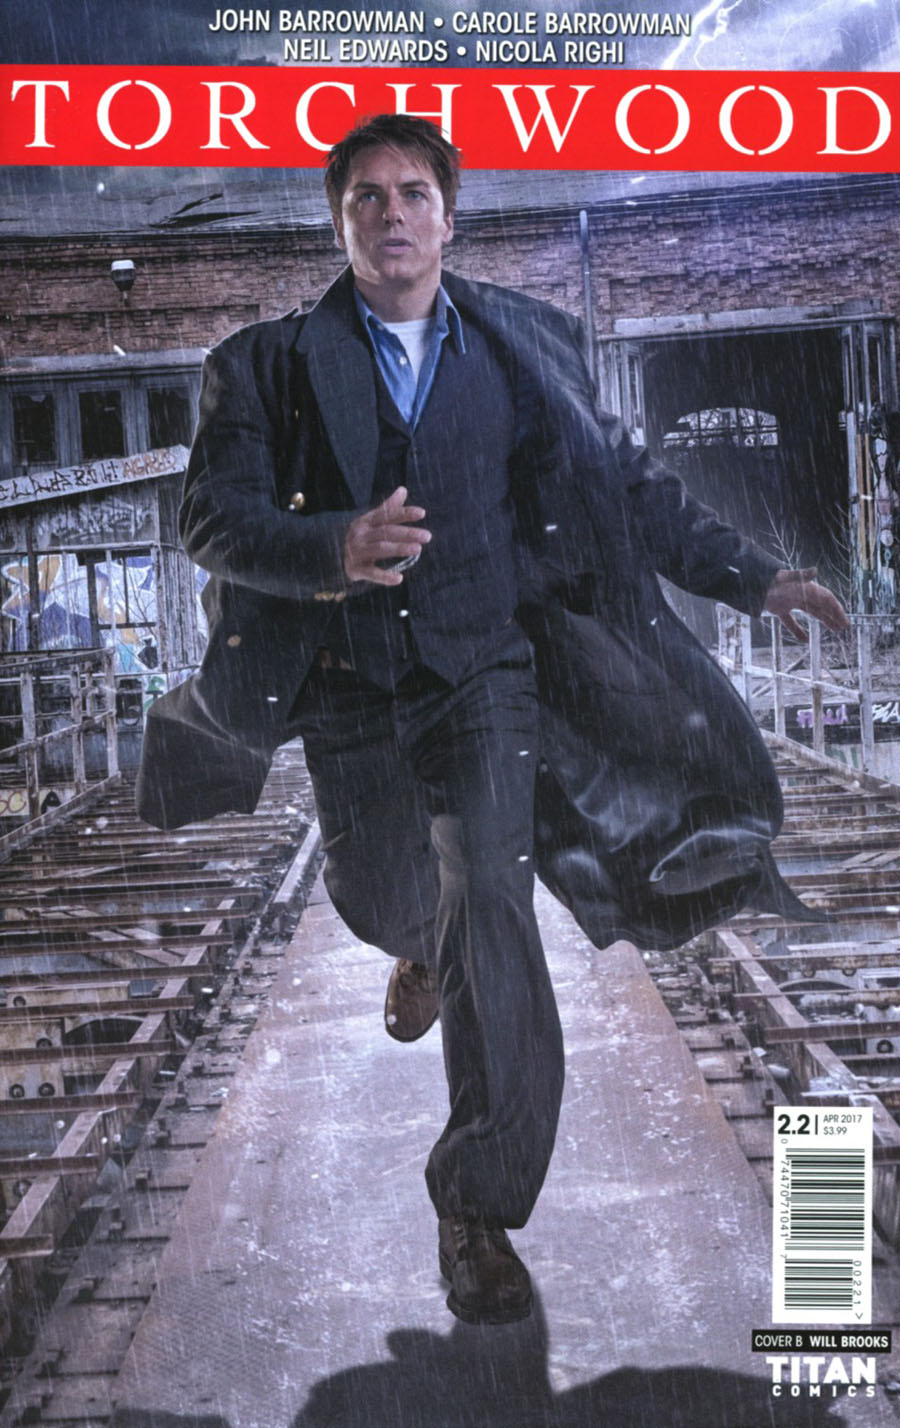 Torchwood Vol 3 #2 Cover B Variant Photo Cover